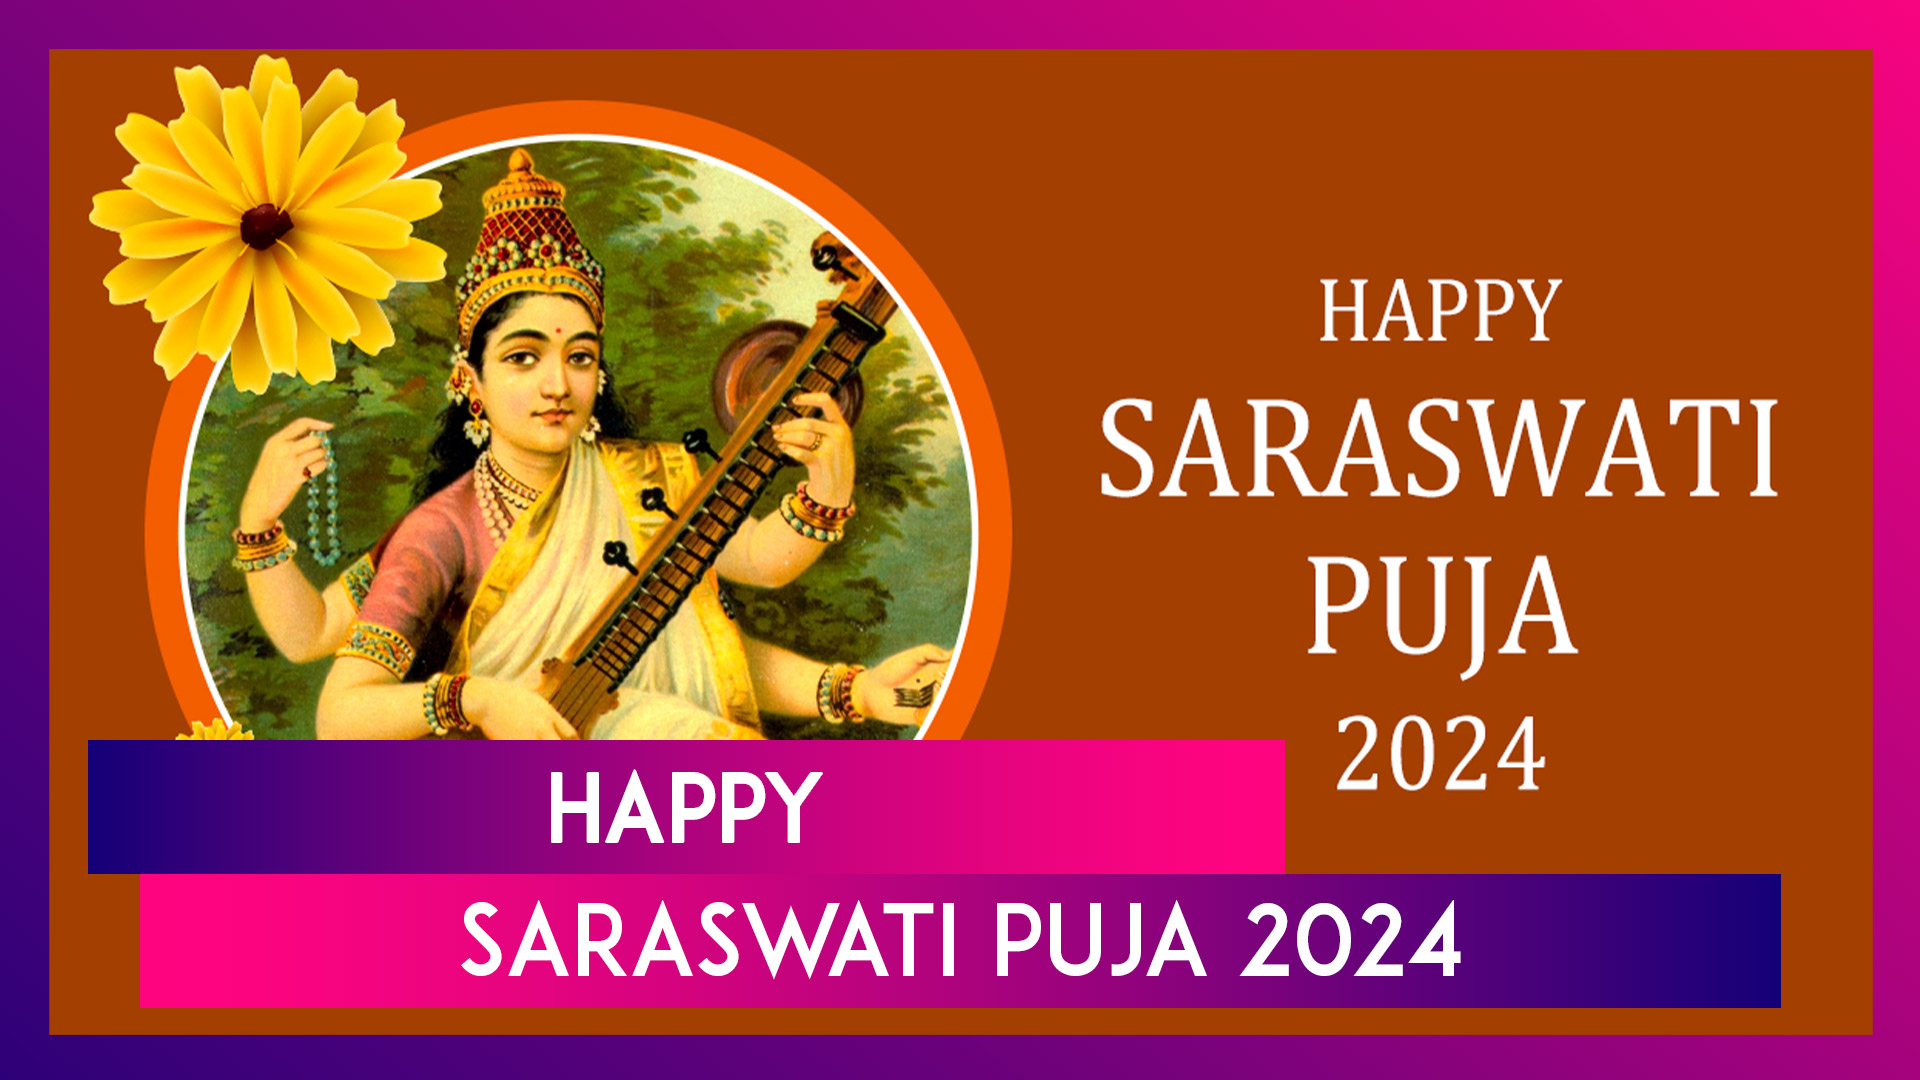 Happy Saraswati Puja 2024 Wishes: WhatsApp Messages, Quotes And Images To Share On Basant Panchami